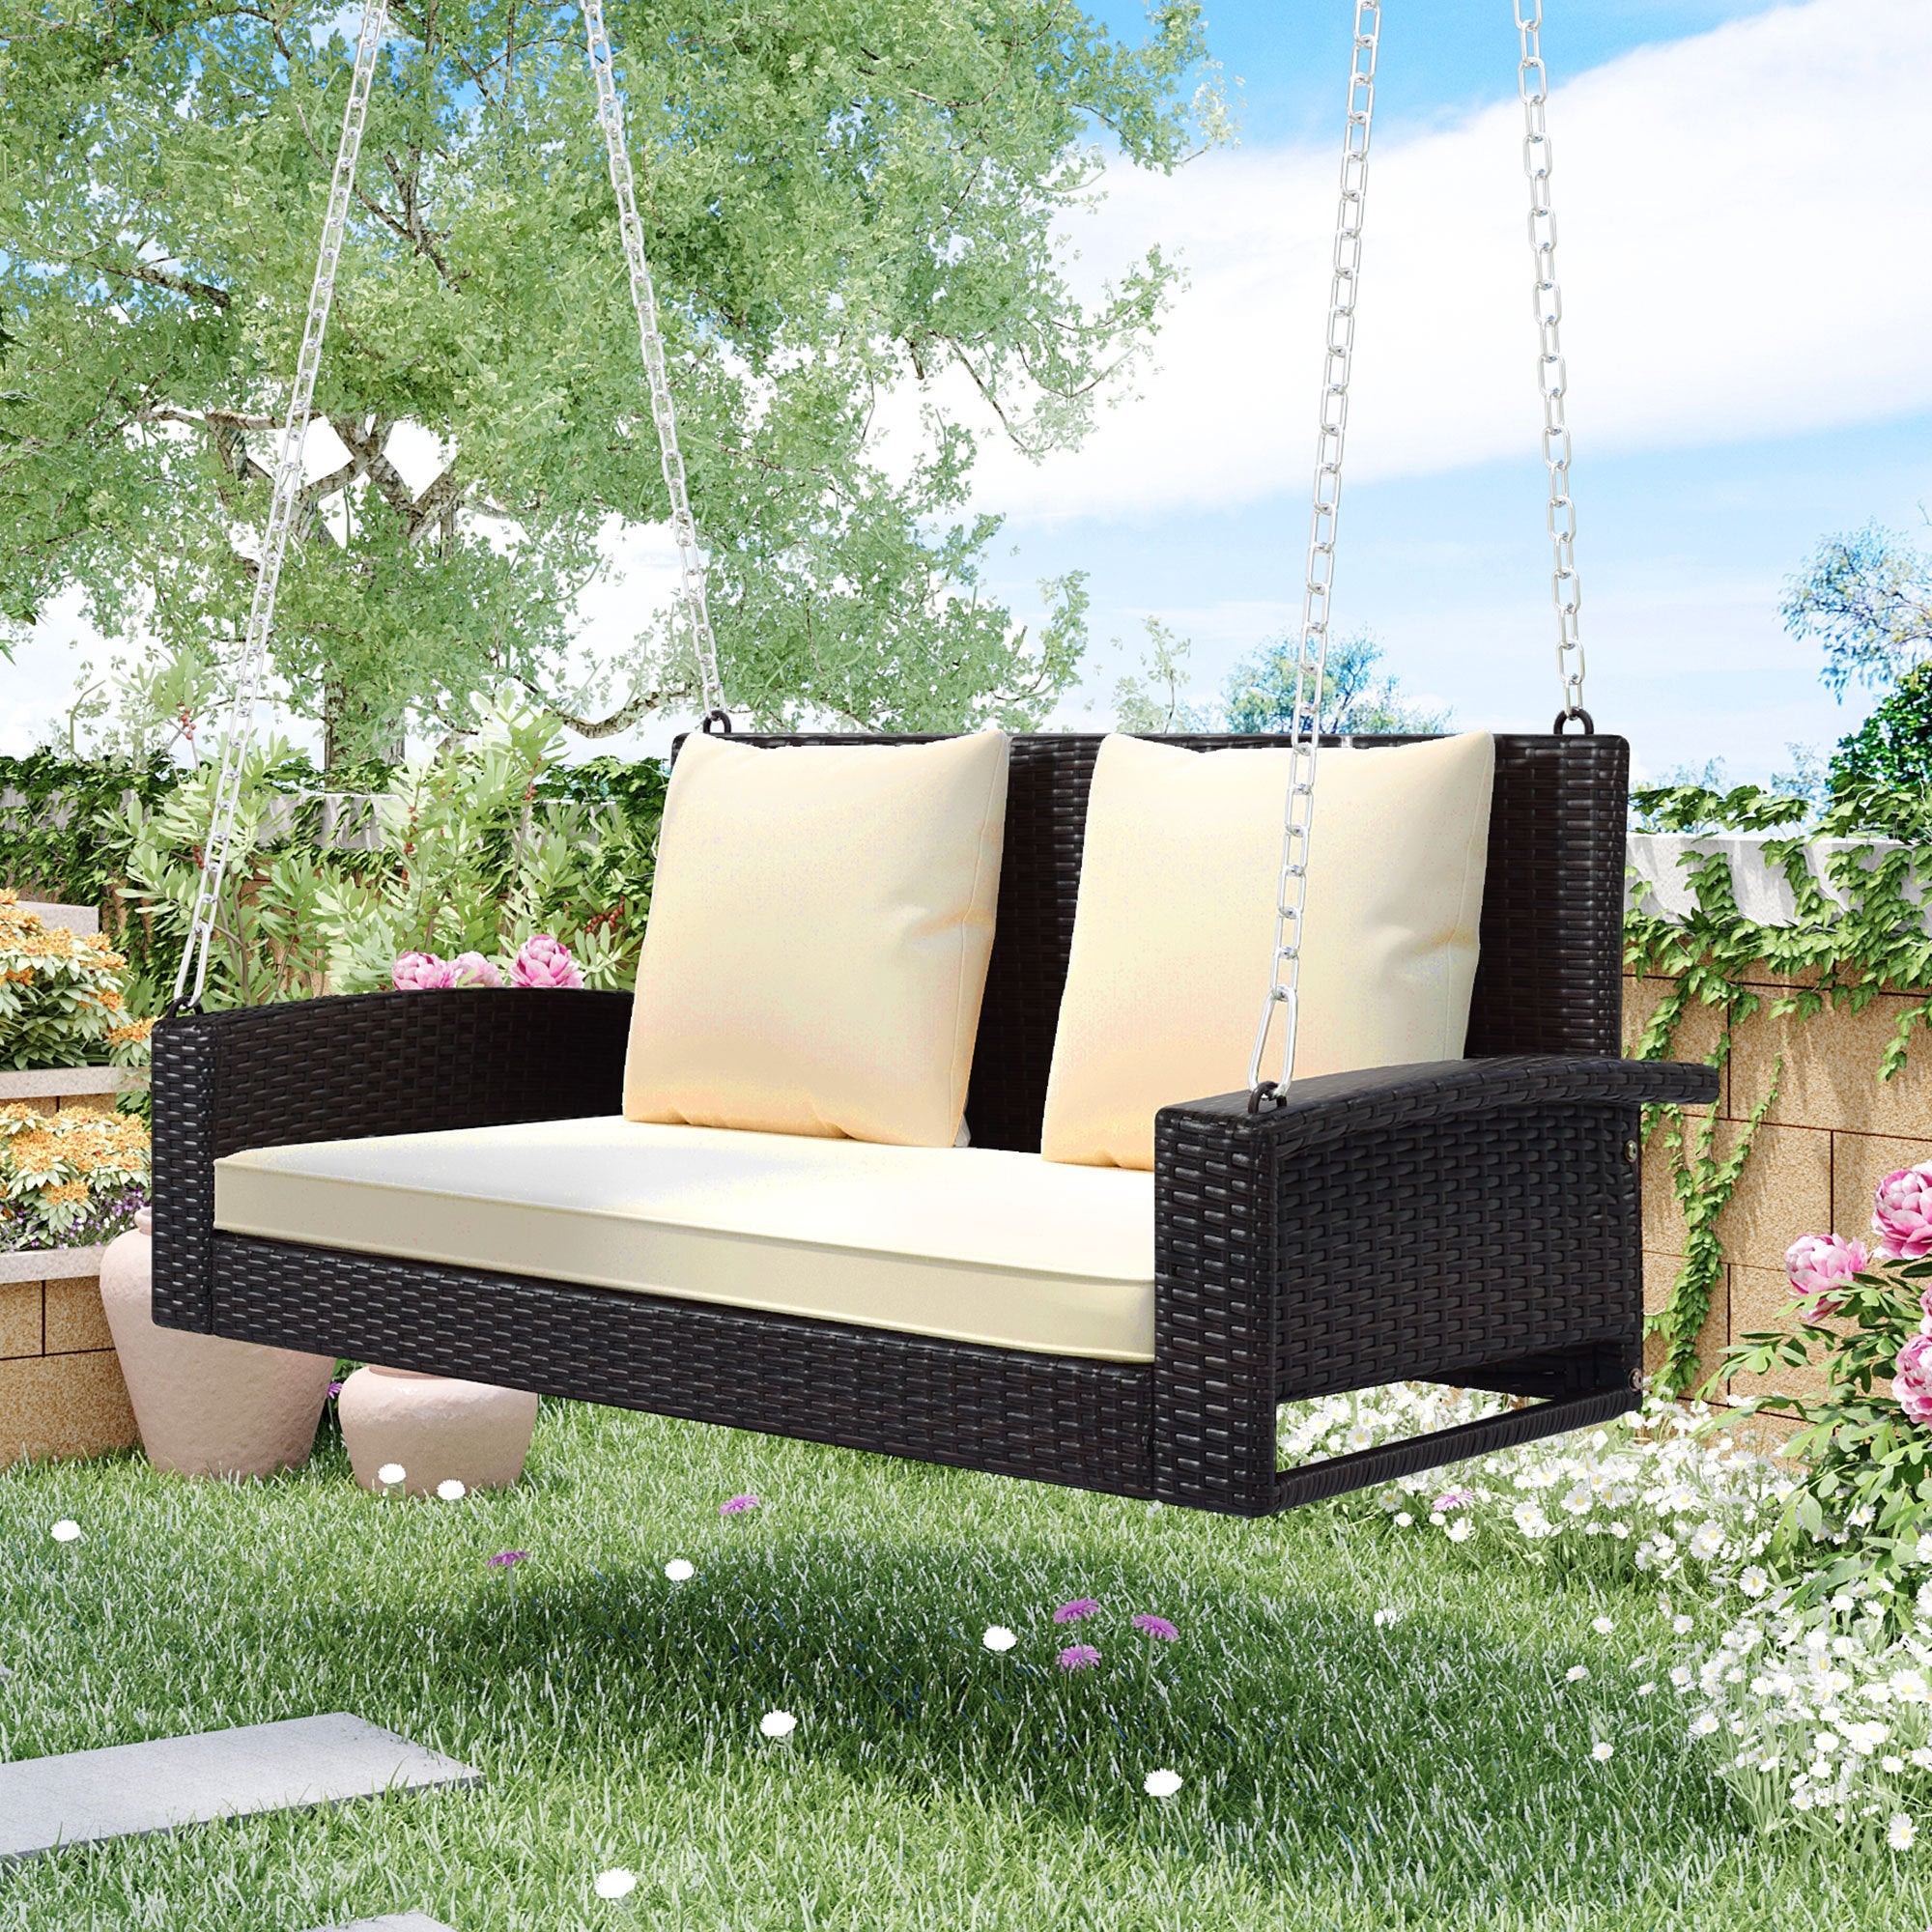 2-Person Wicker Hanging Porch Swing with Chains, Cushion, Pillow, Rattan Swing Bench for Garden, Backyard, Pond (Brown Wicker, Beige Cushion)